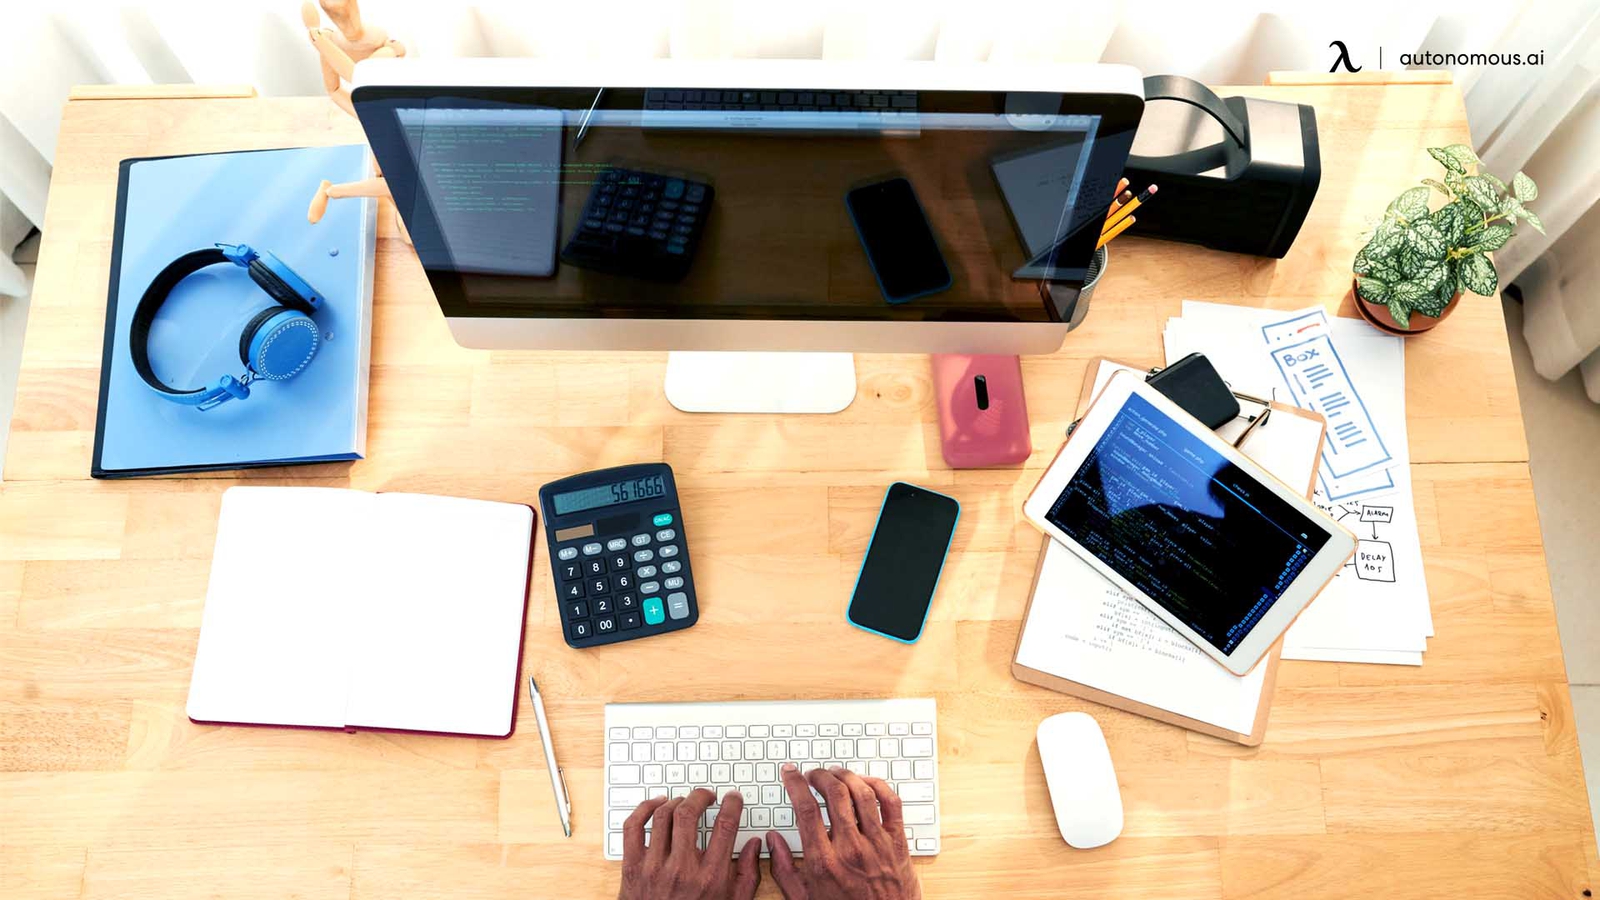 10 Work Desk Organization Tips to Boost Productivity